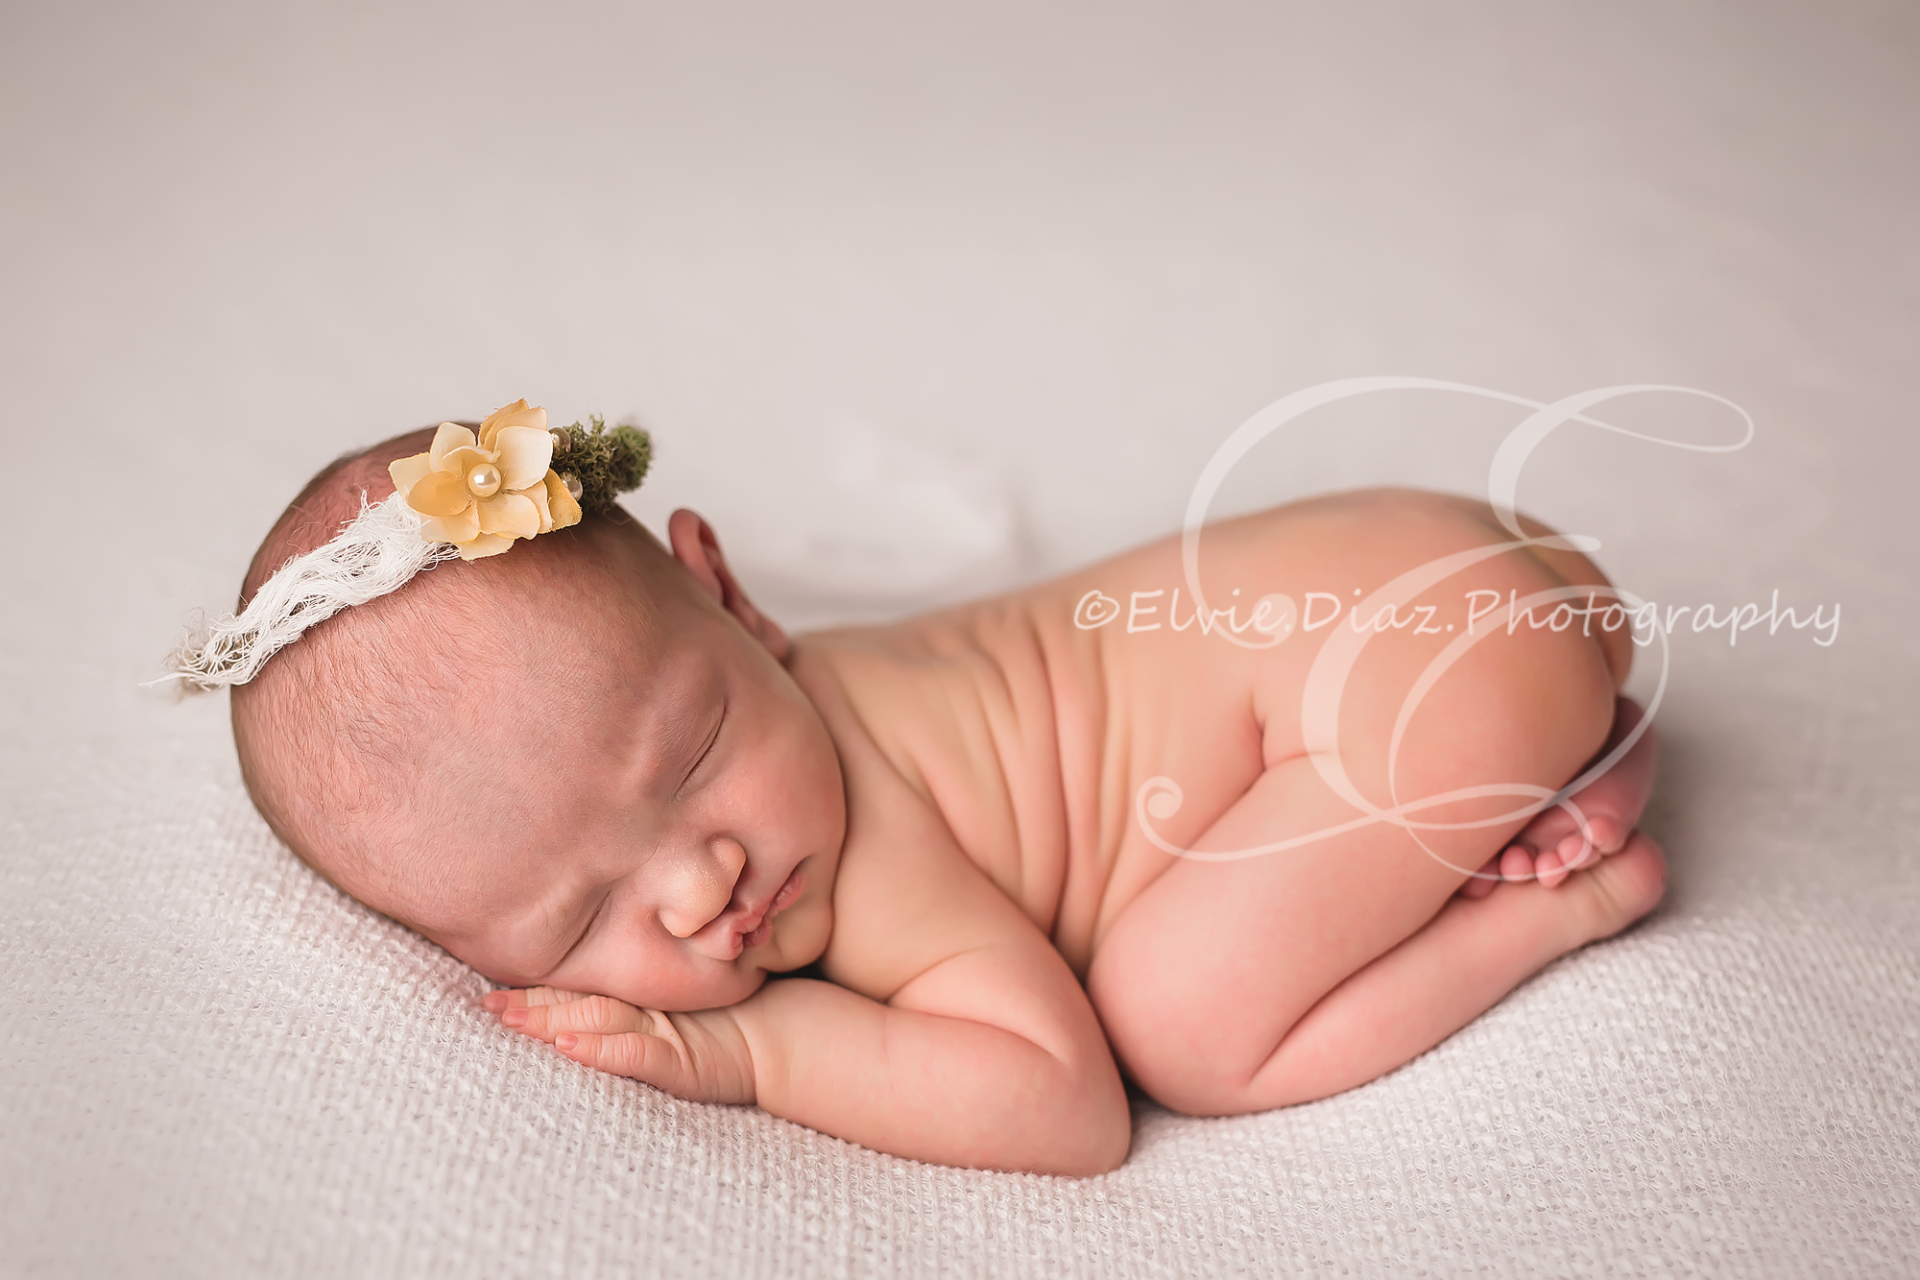 Alexa stopped by today…(Chicago NEwborn Photographer)